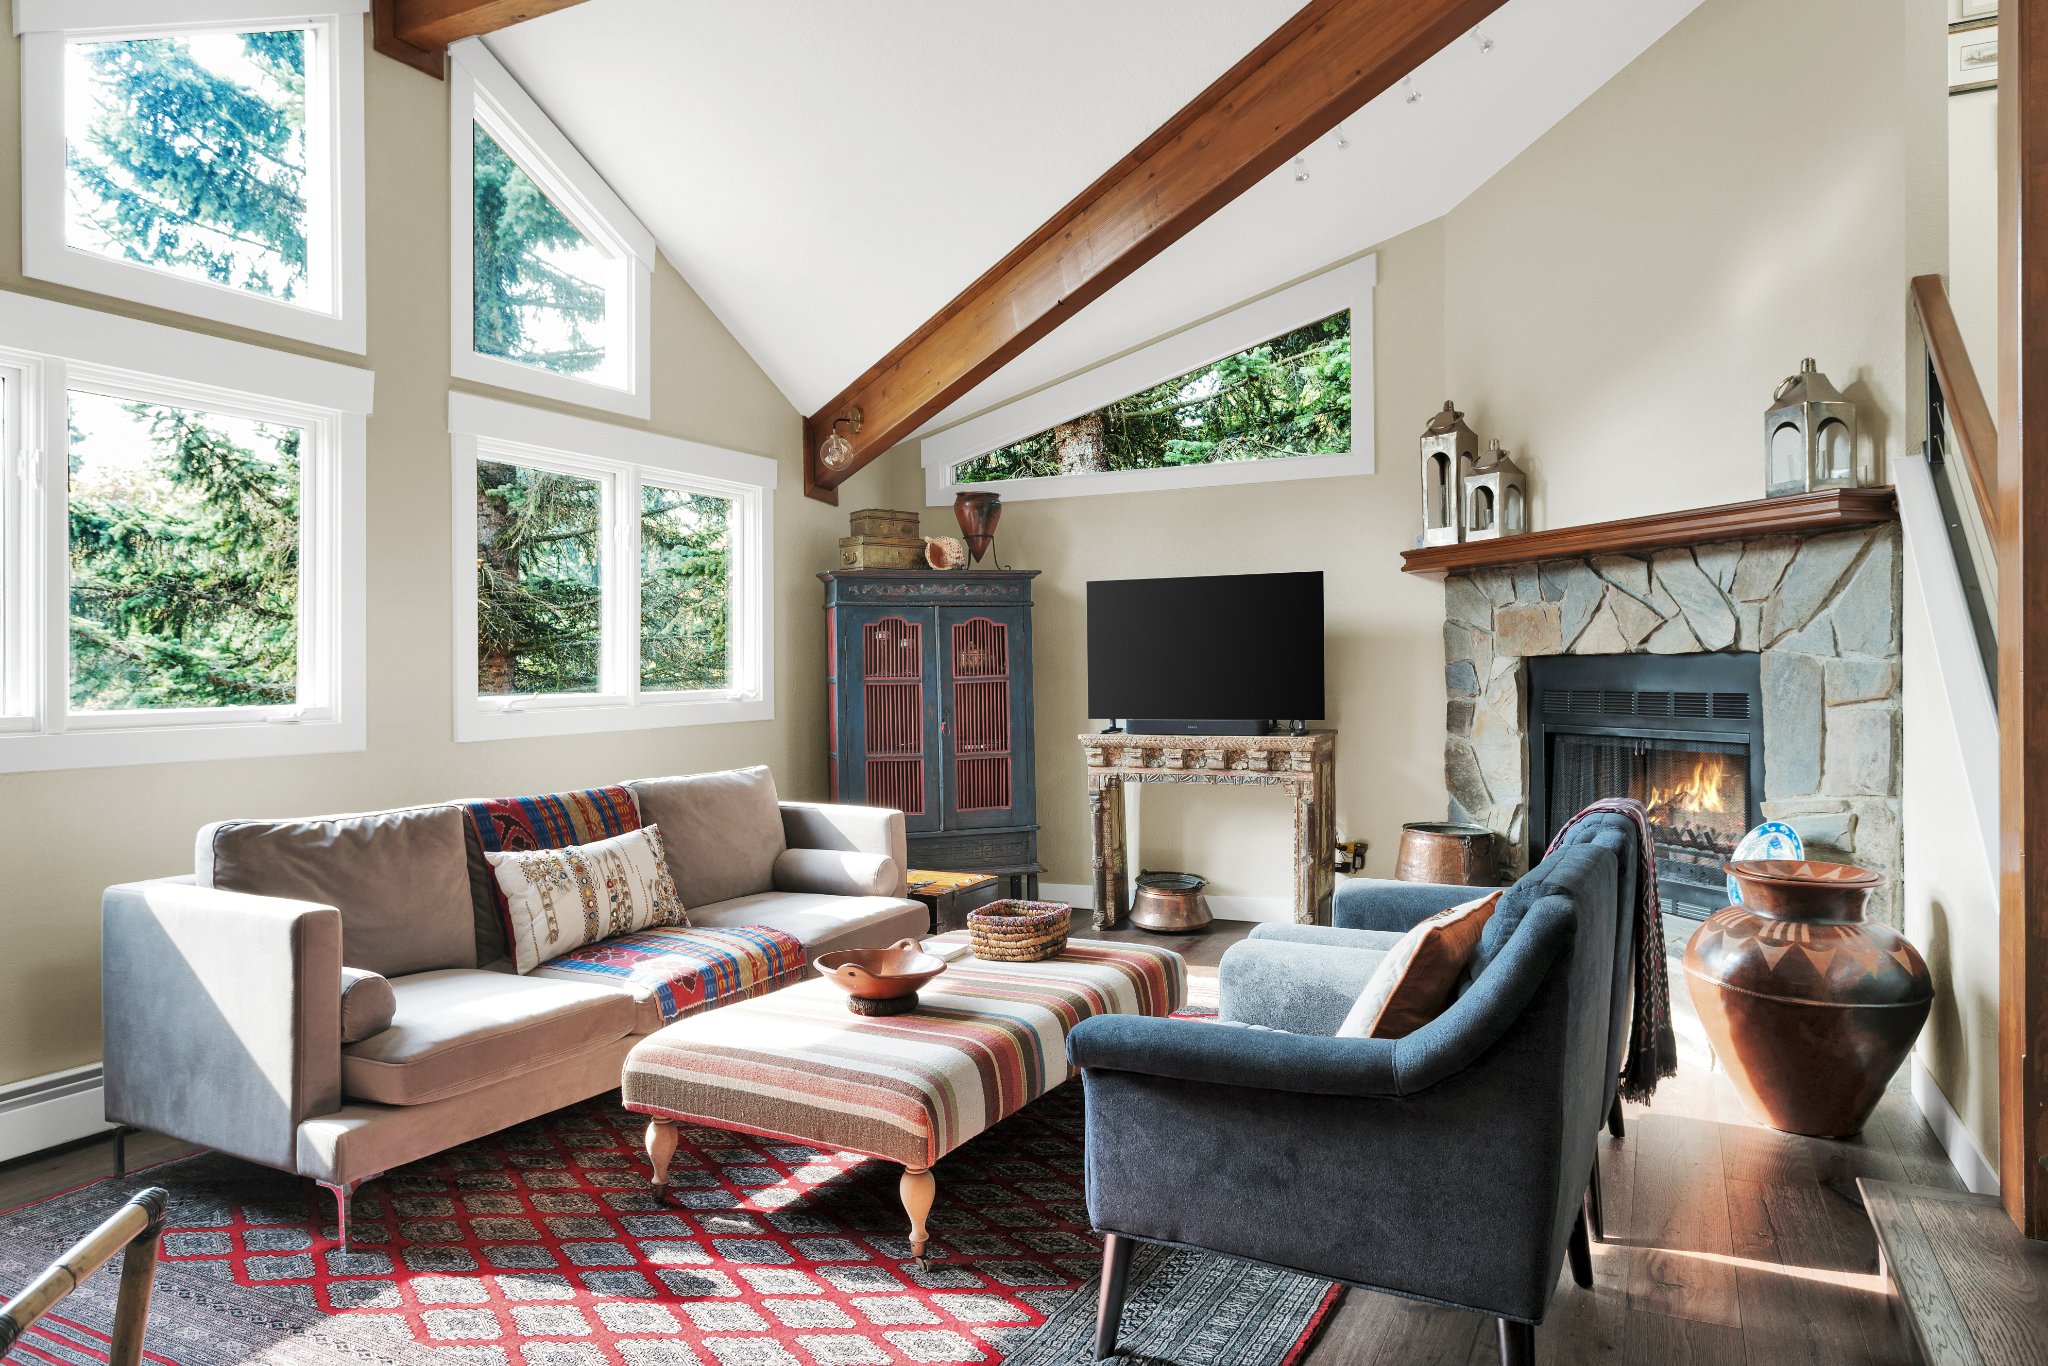 Contemporary living room with vaulted ceilings and natural light.